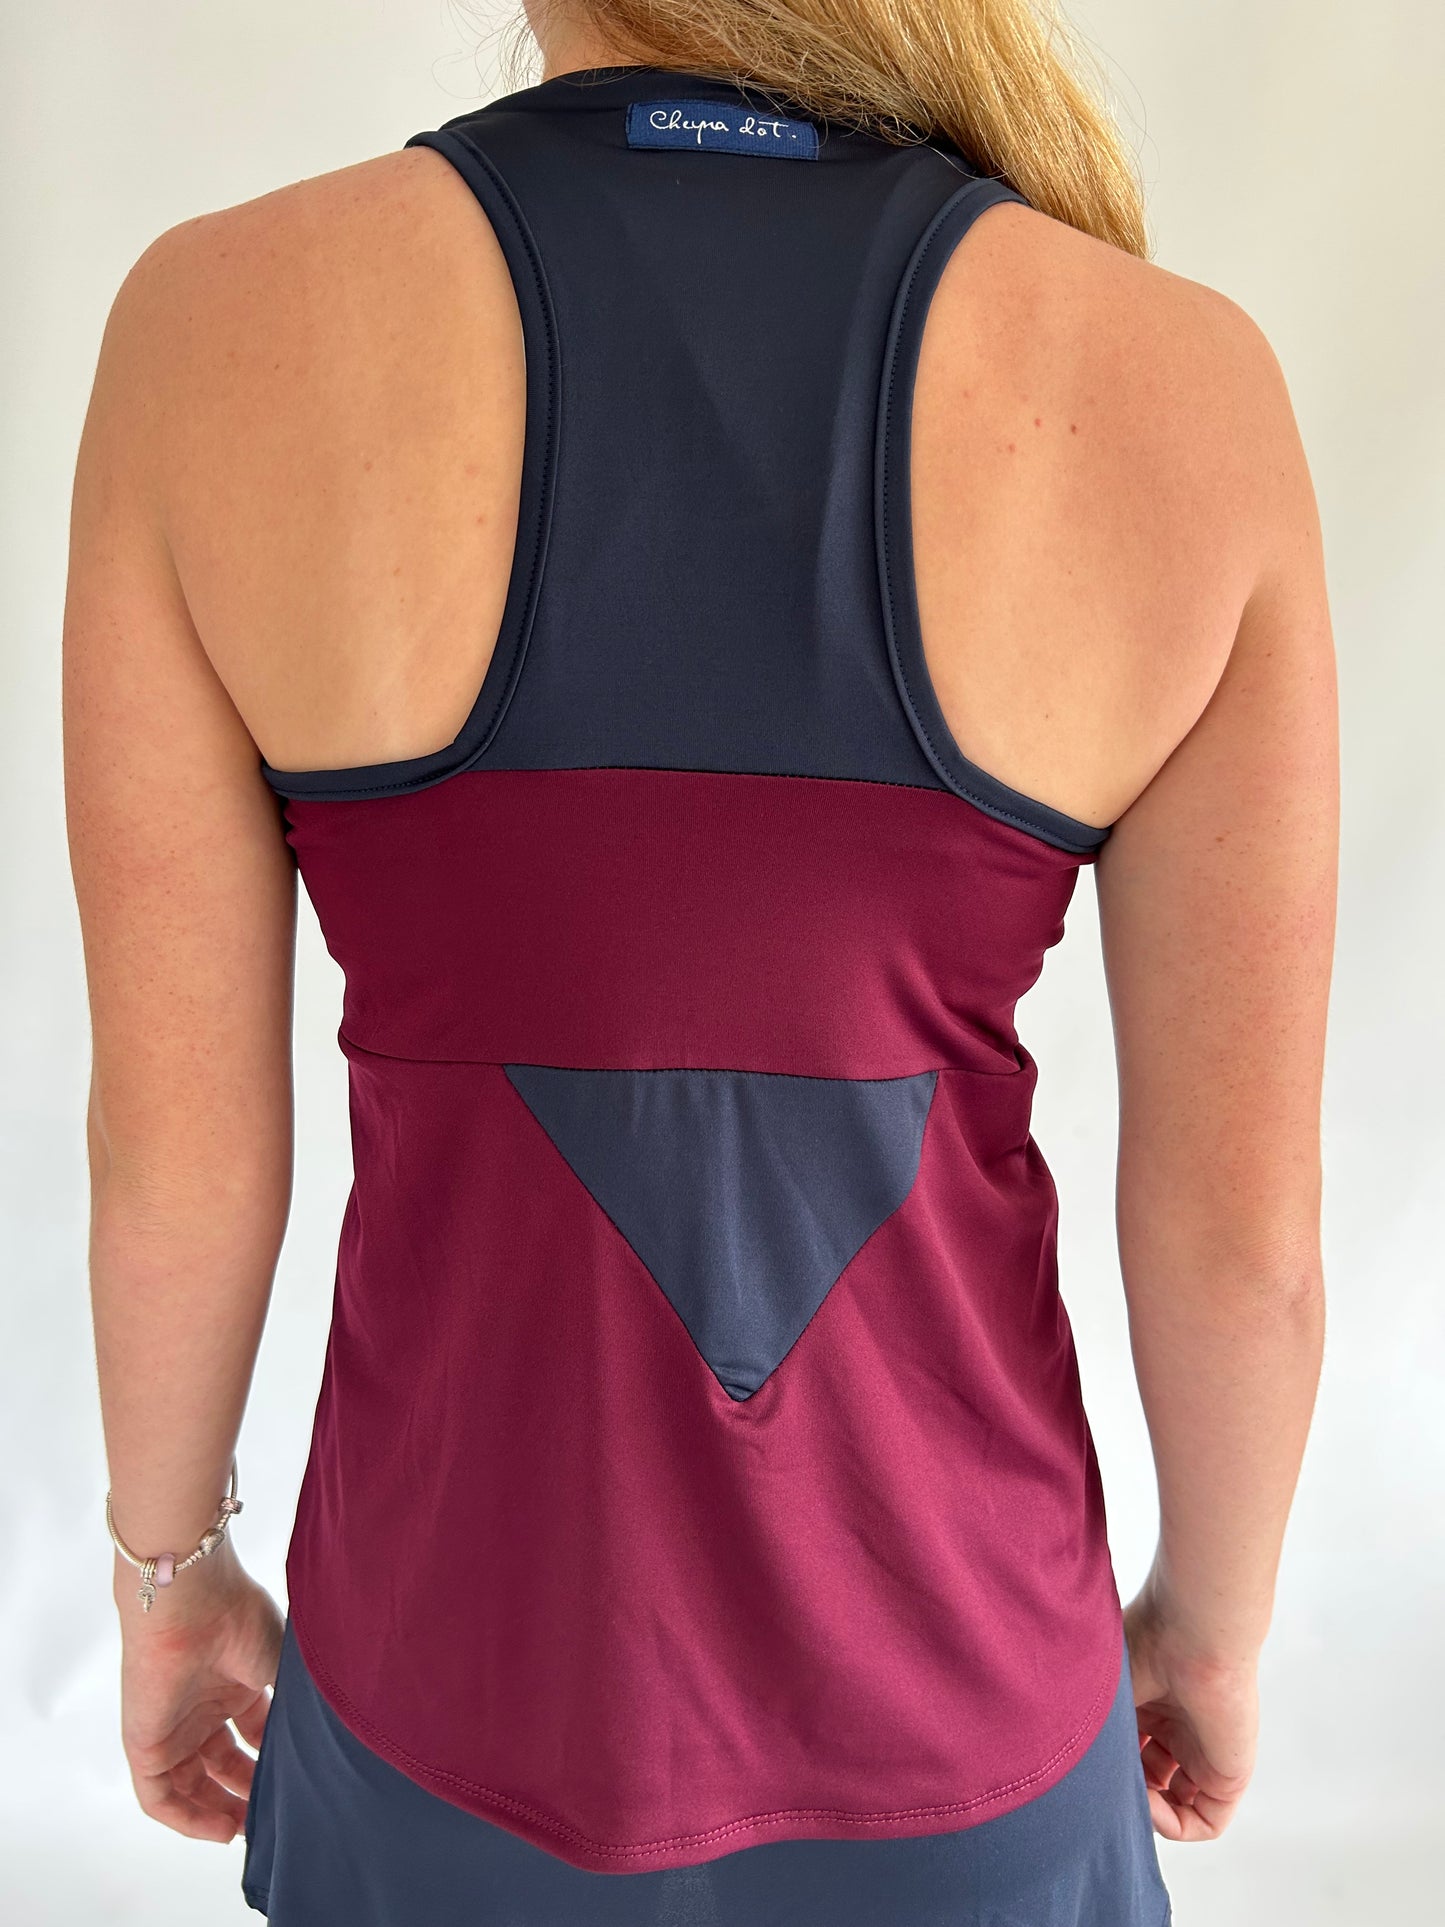 MAROON AND NAVY HIGH NECK SMALL